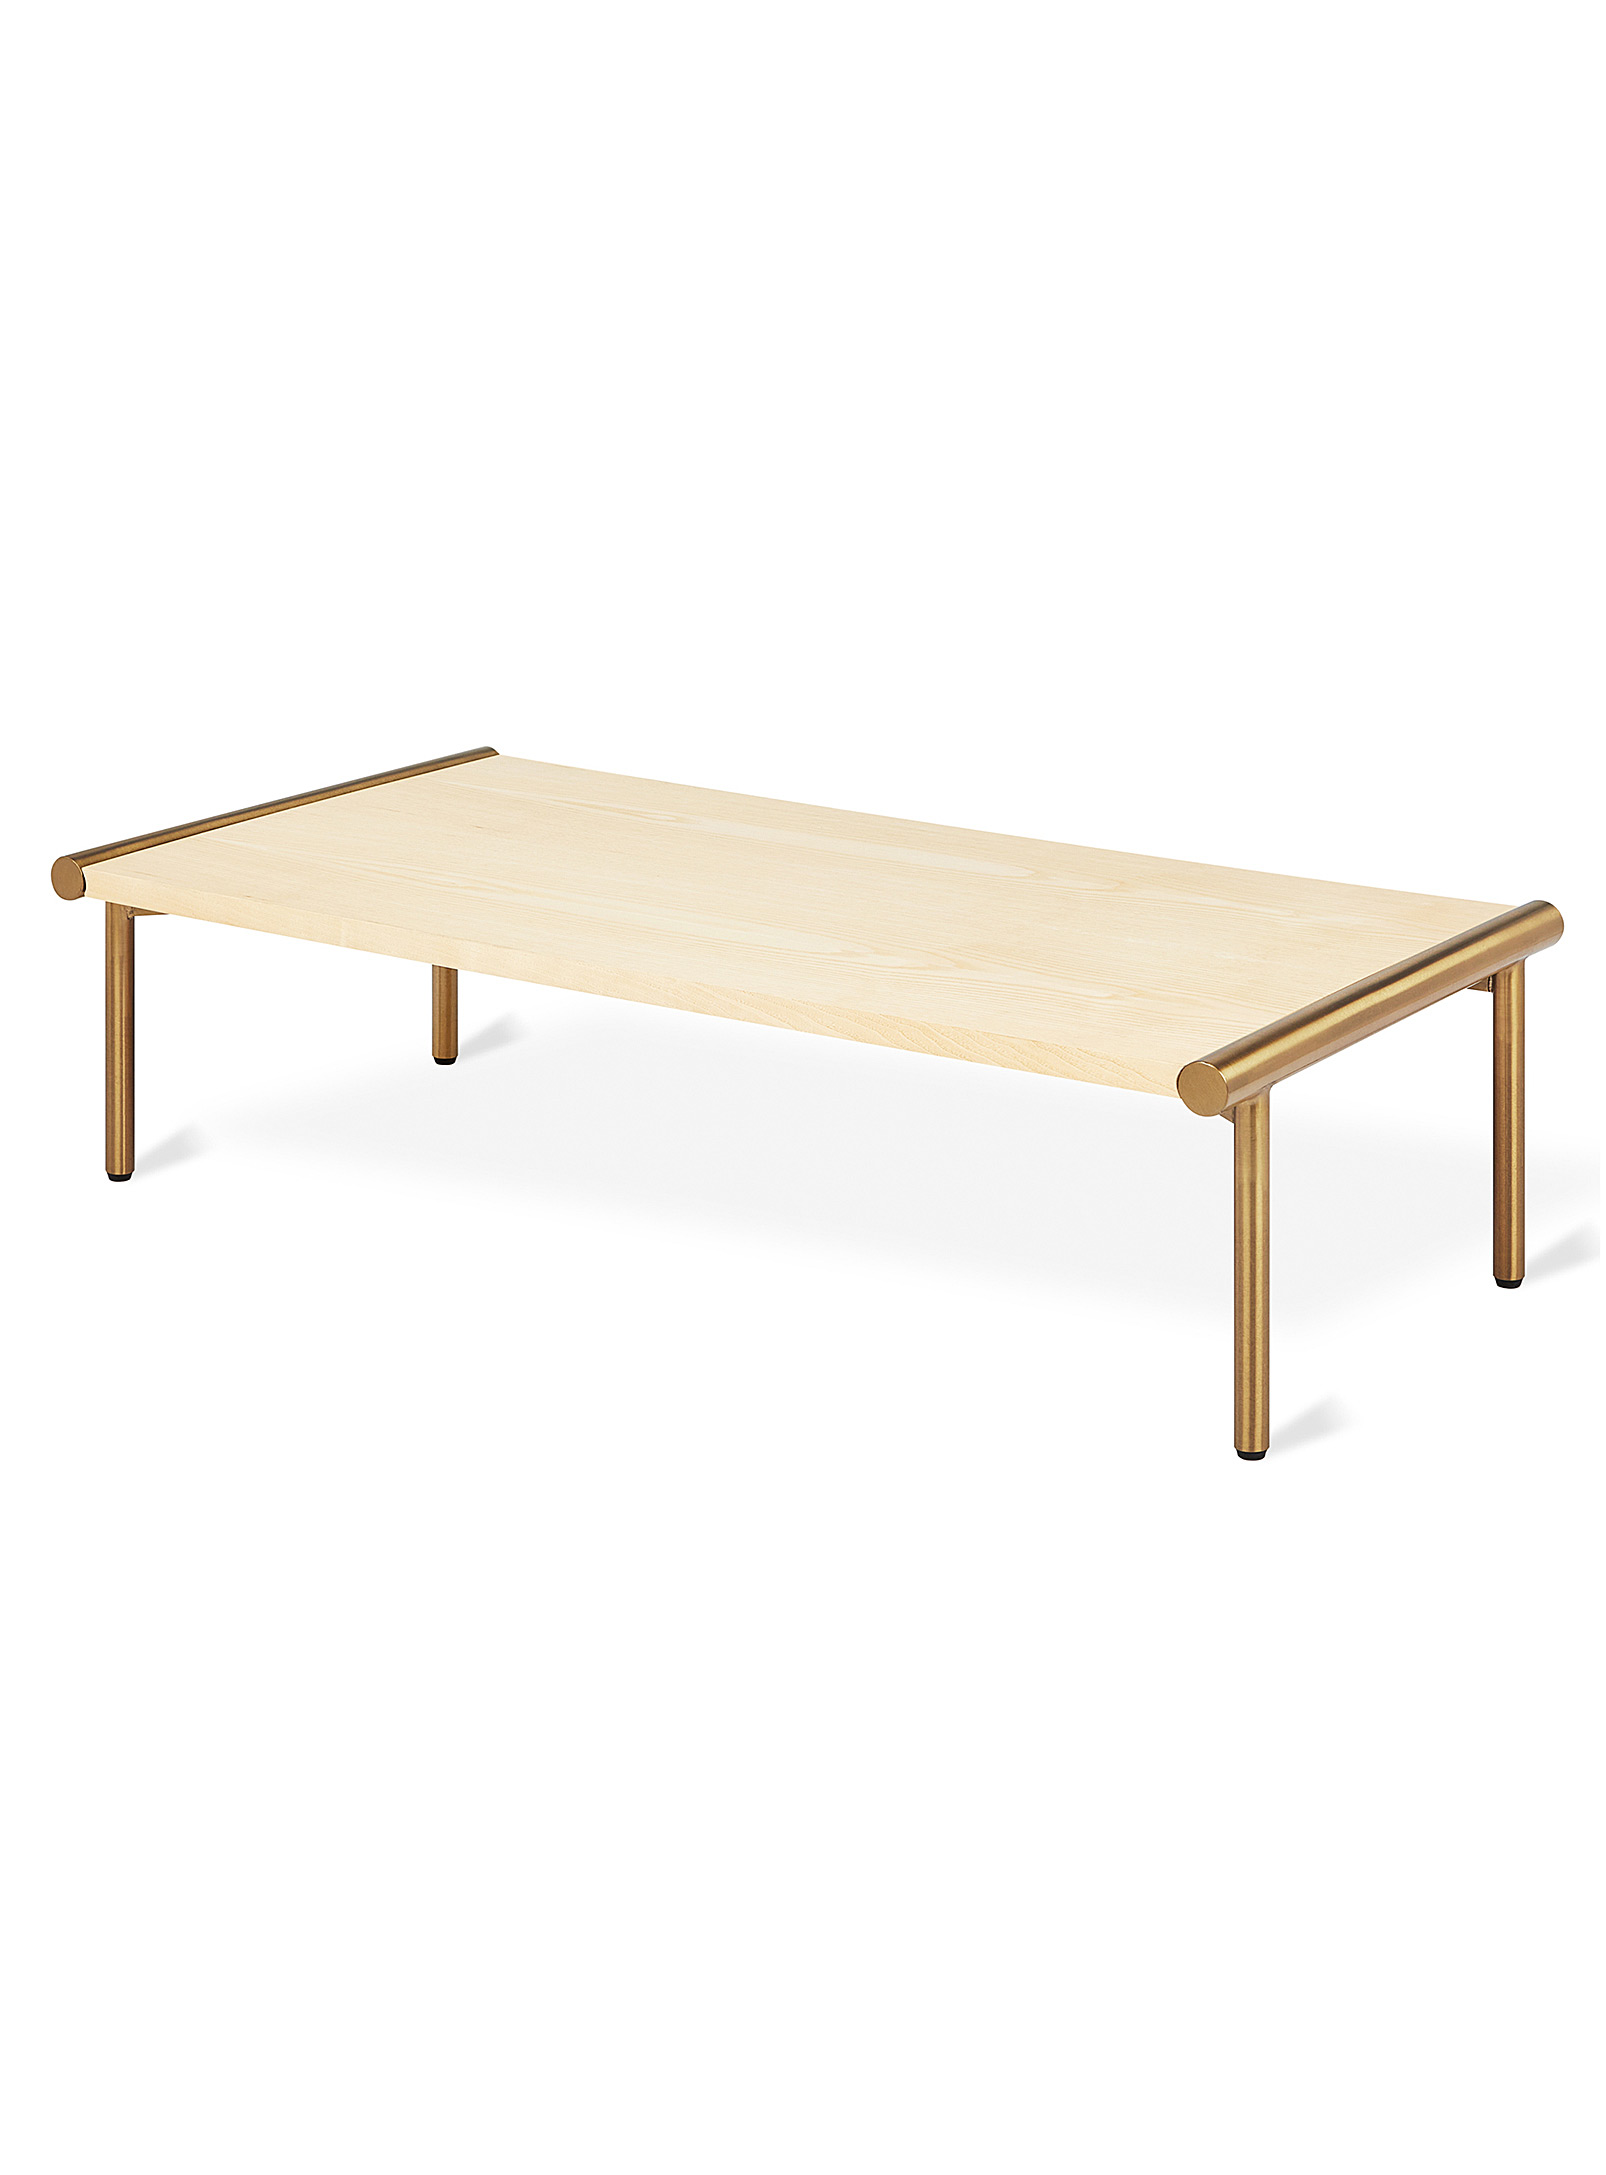 Gus Minimalist Wood And Metal Coffee Table See Available Sizes In Assorted